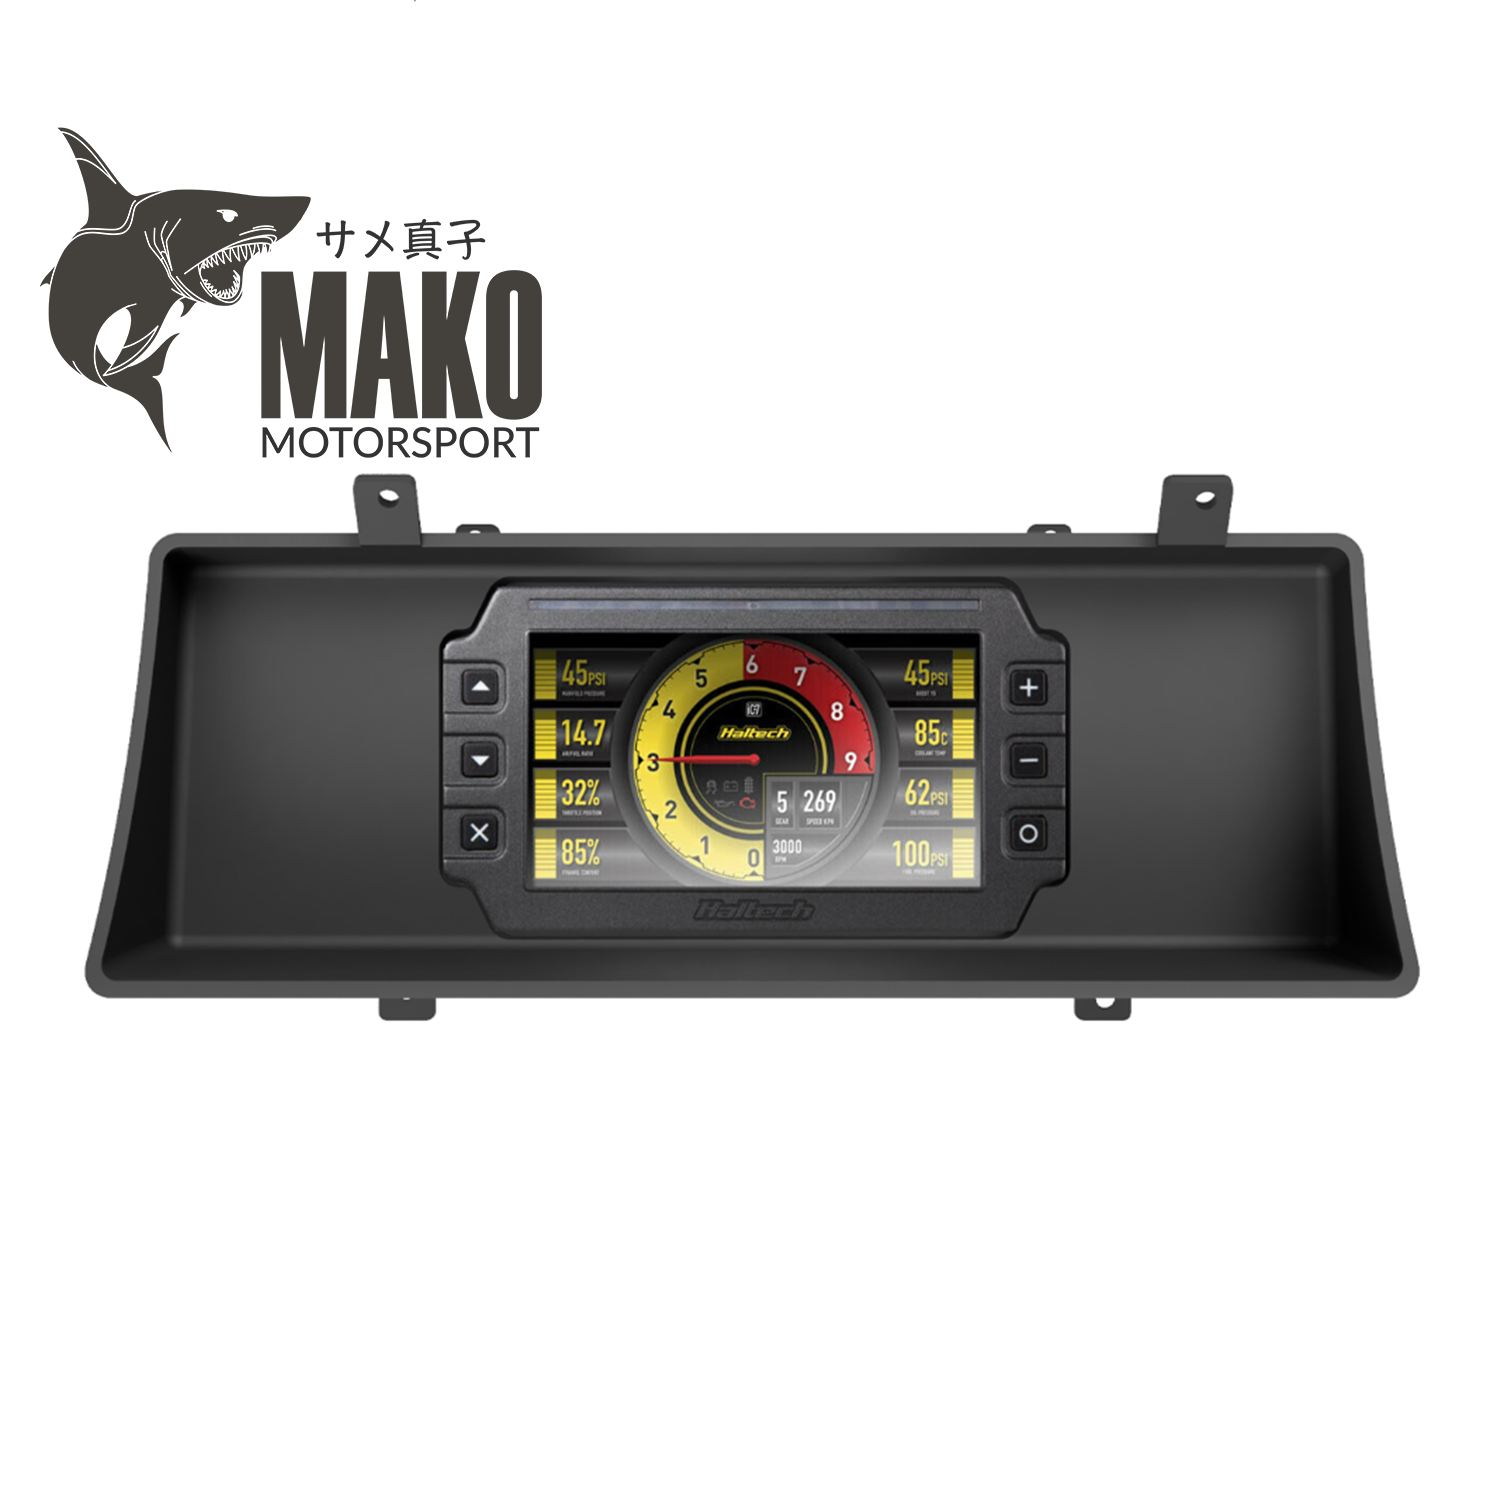 Ford Falcon XD XE Recessed Dash Mount for the Haltech iC-7 (display not included)